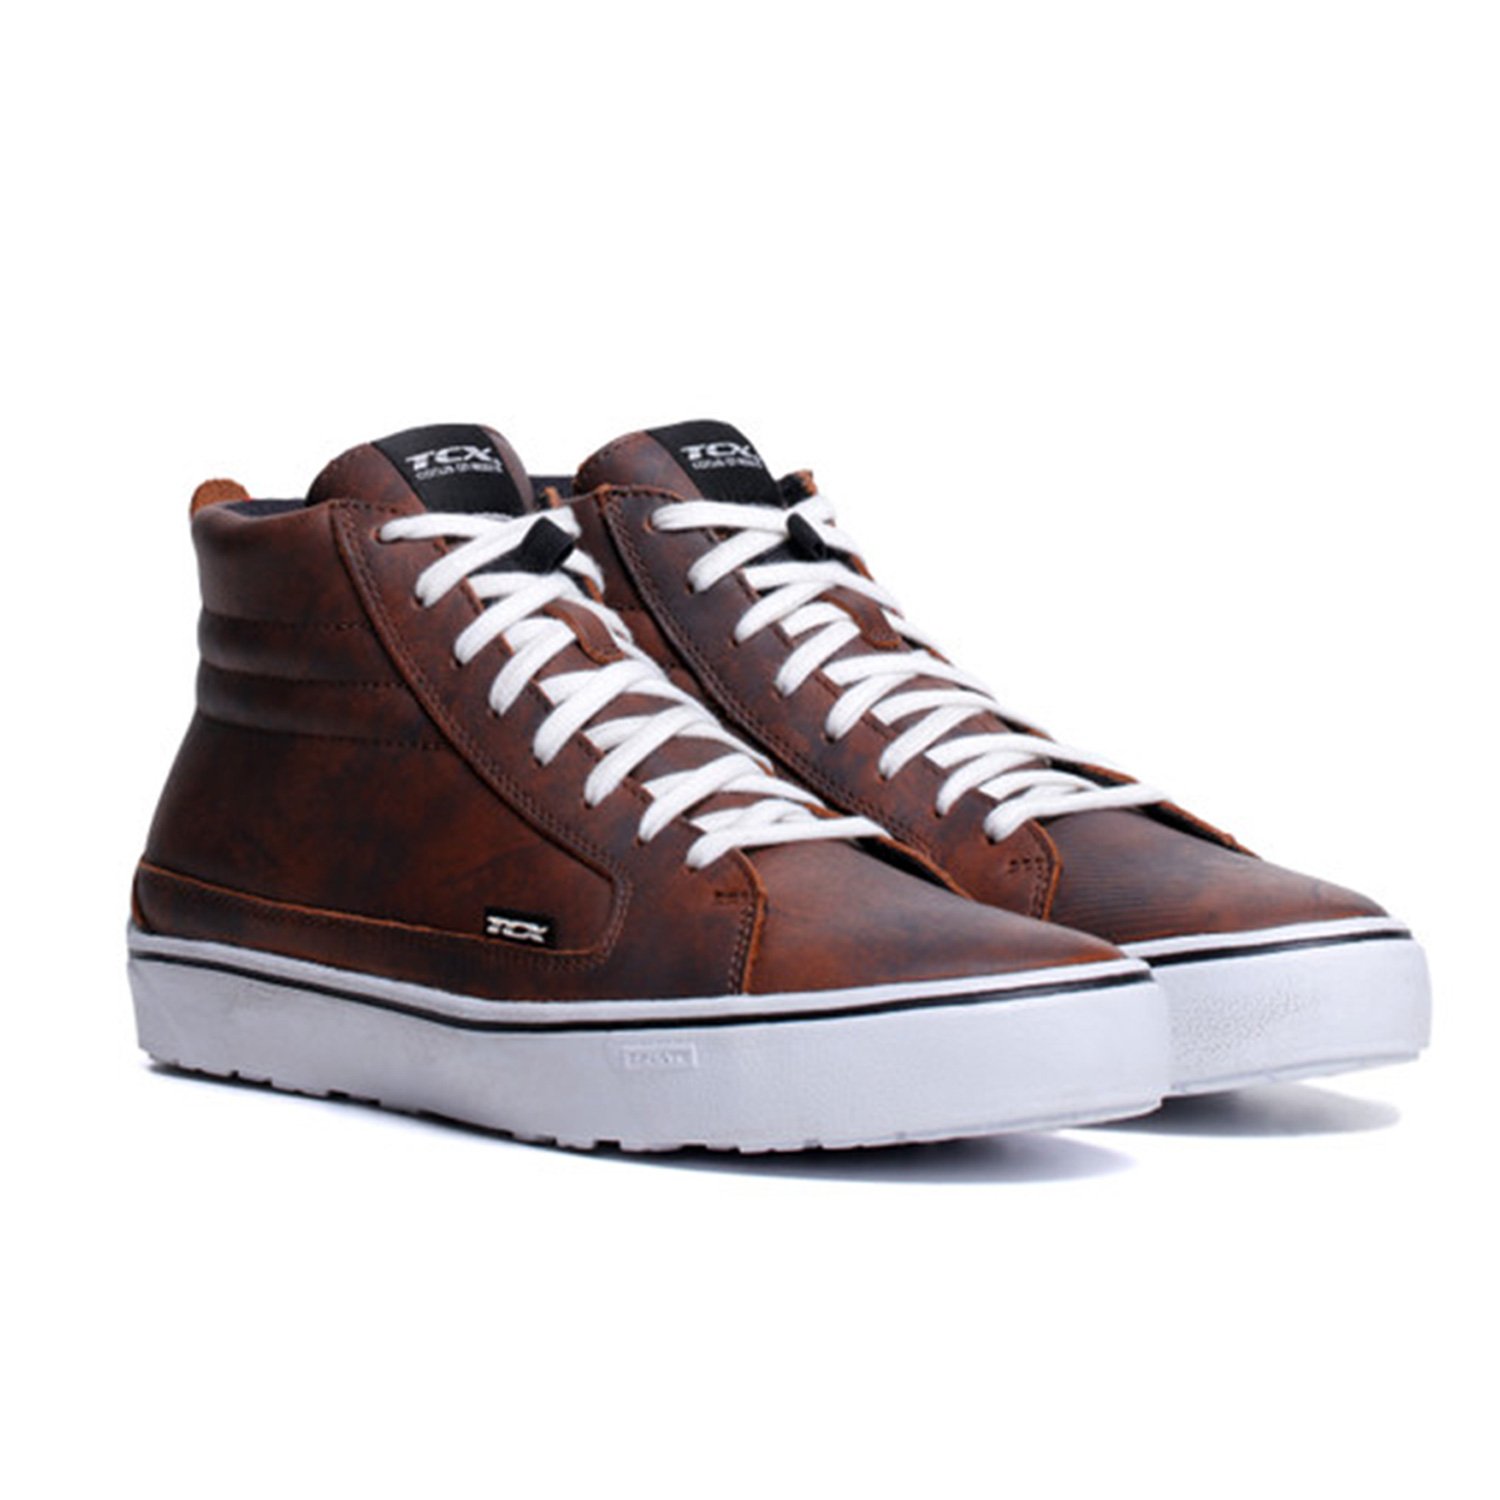 Image of TCX Street 3 WP Brown White Size 48 ID 8051019547910